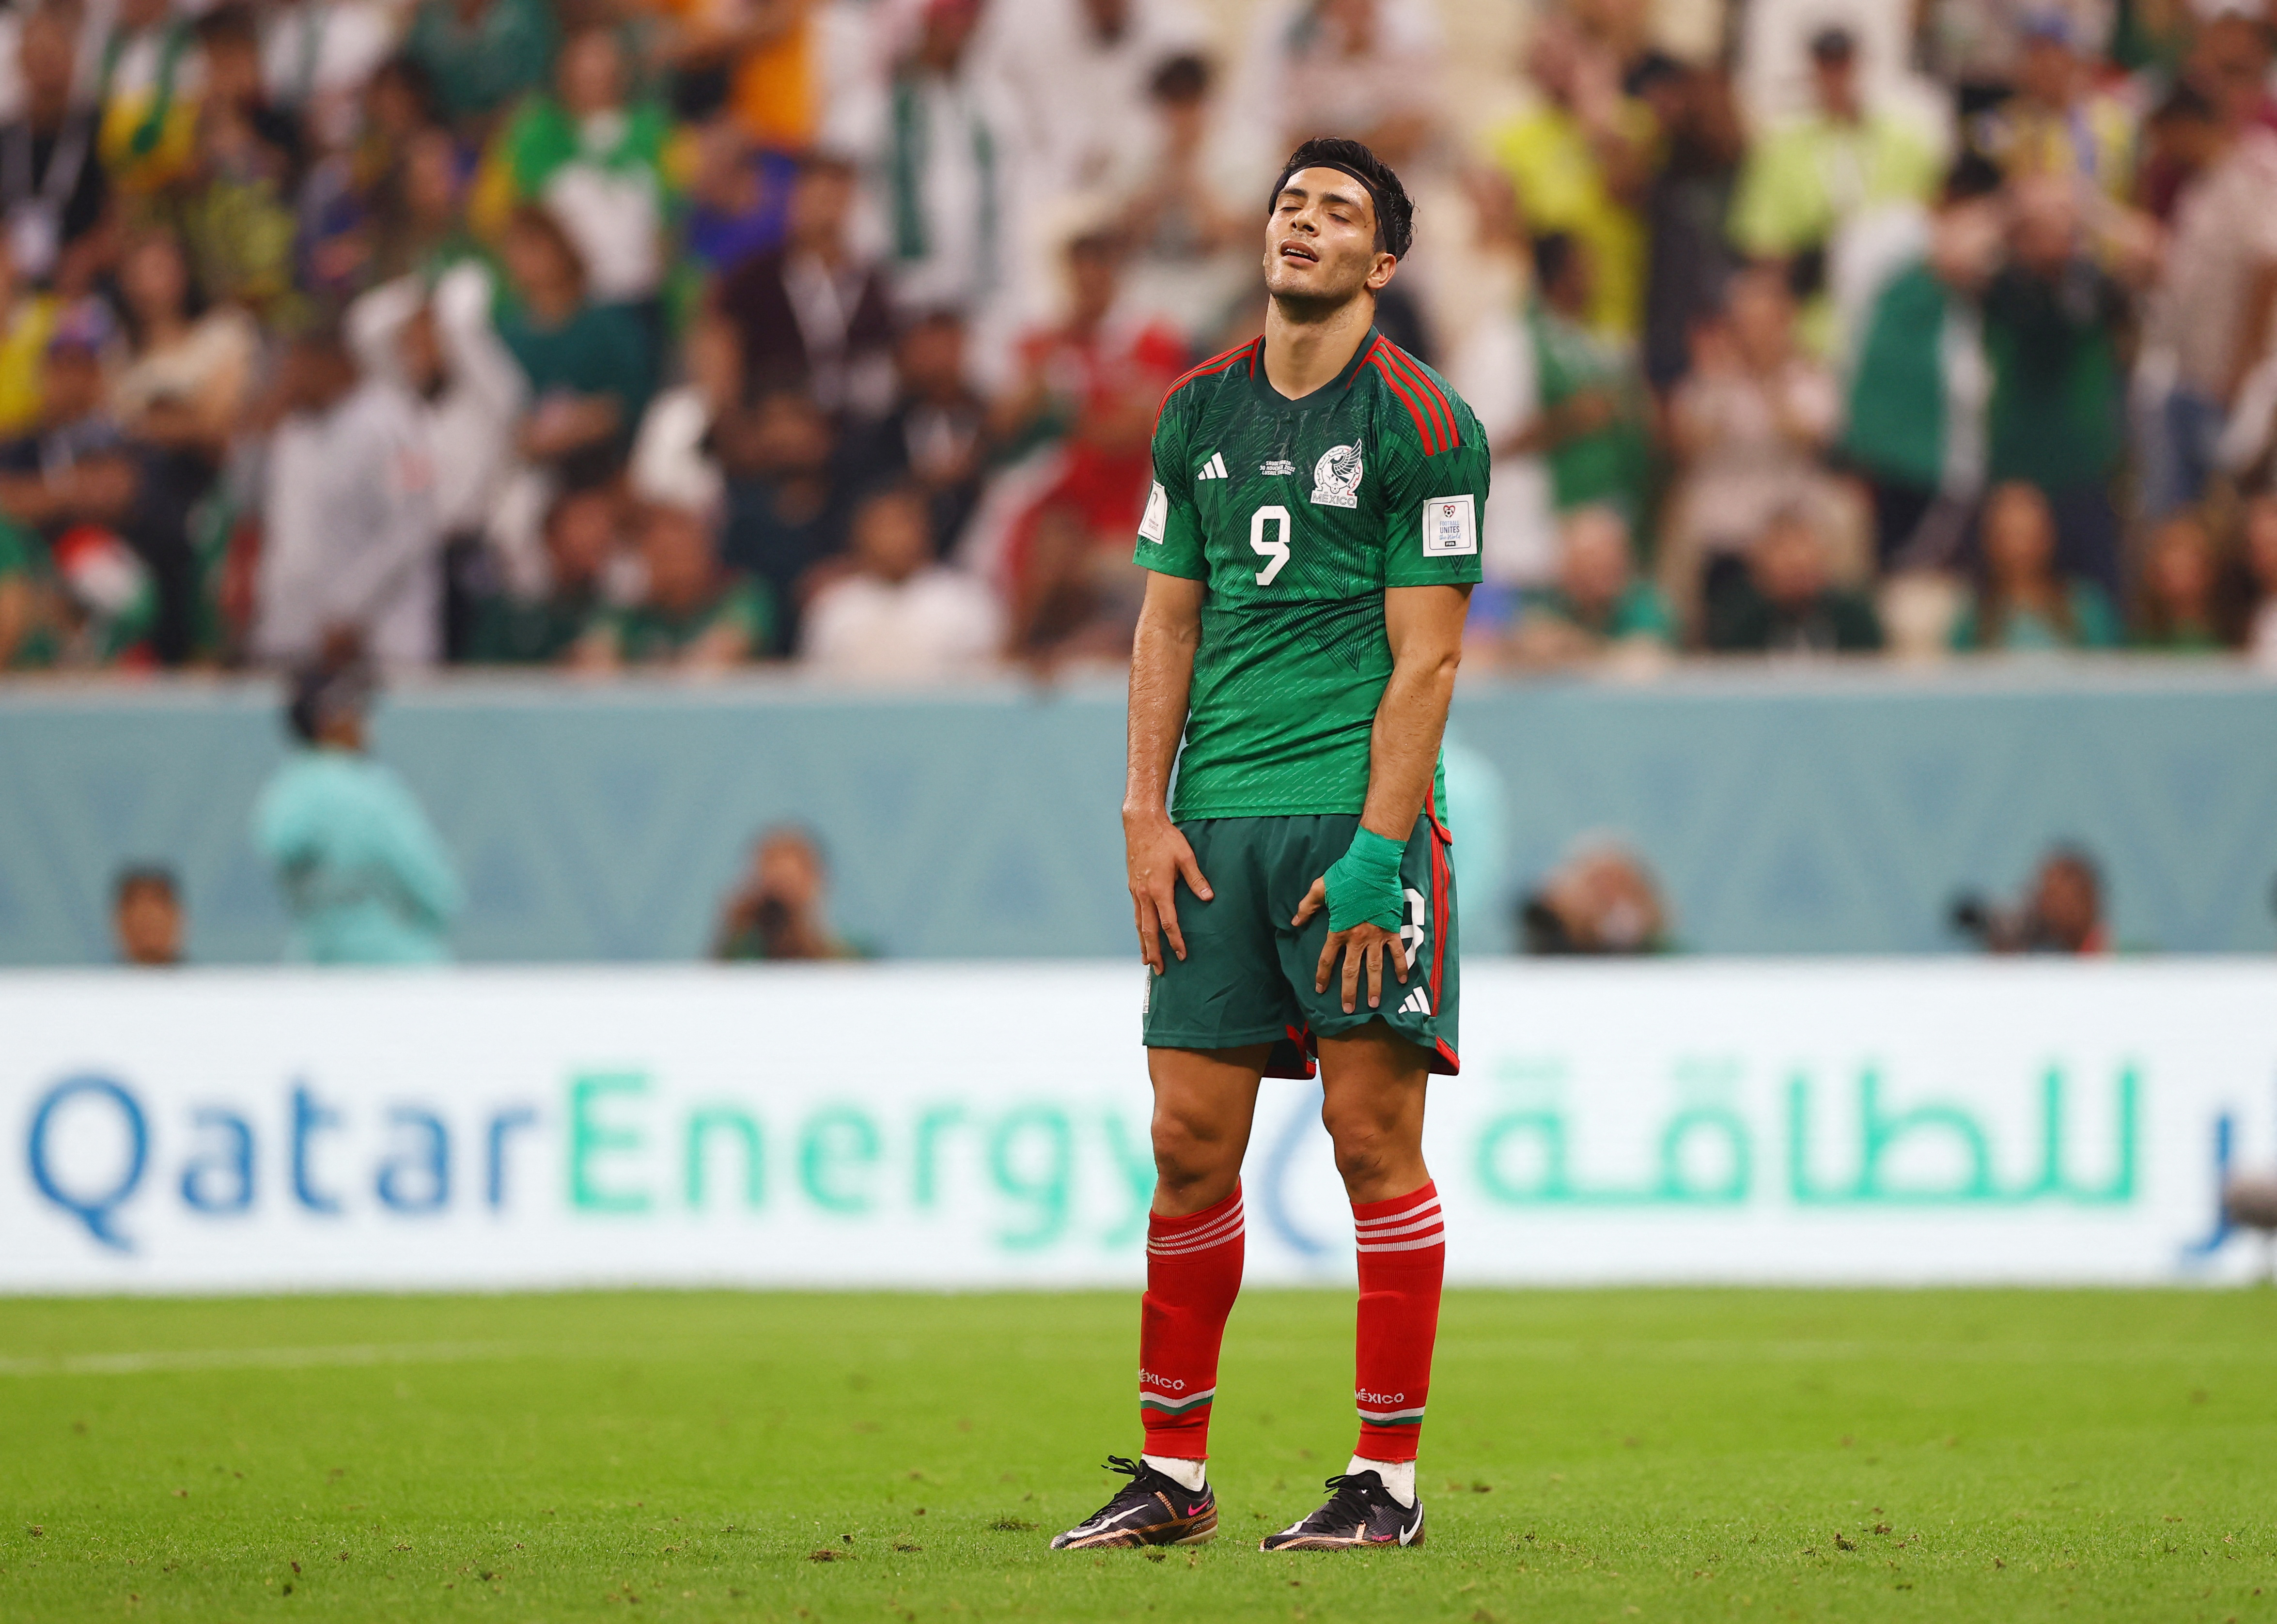 Soccer Football - FIFA World Cup Qatar 2022 - Group C - Saudi Arabia v Mexico - Lusail Stadium, Lusail, Qatar - November 30, 2022 Mexico's Raul Jimenez looks dejected after being eliminated from the World Cup REUTERS/Matthew Childs